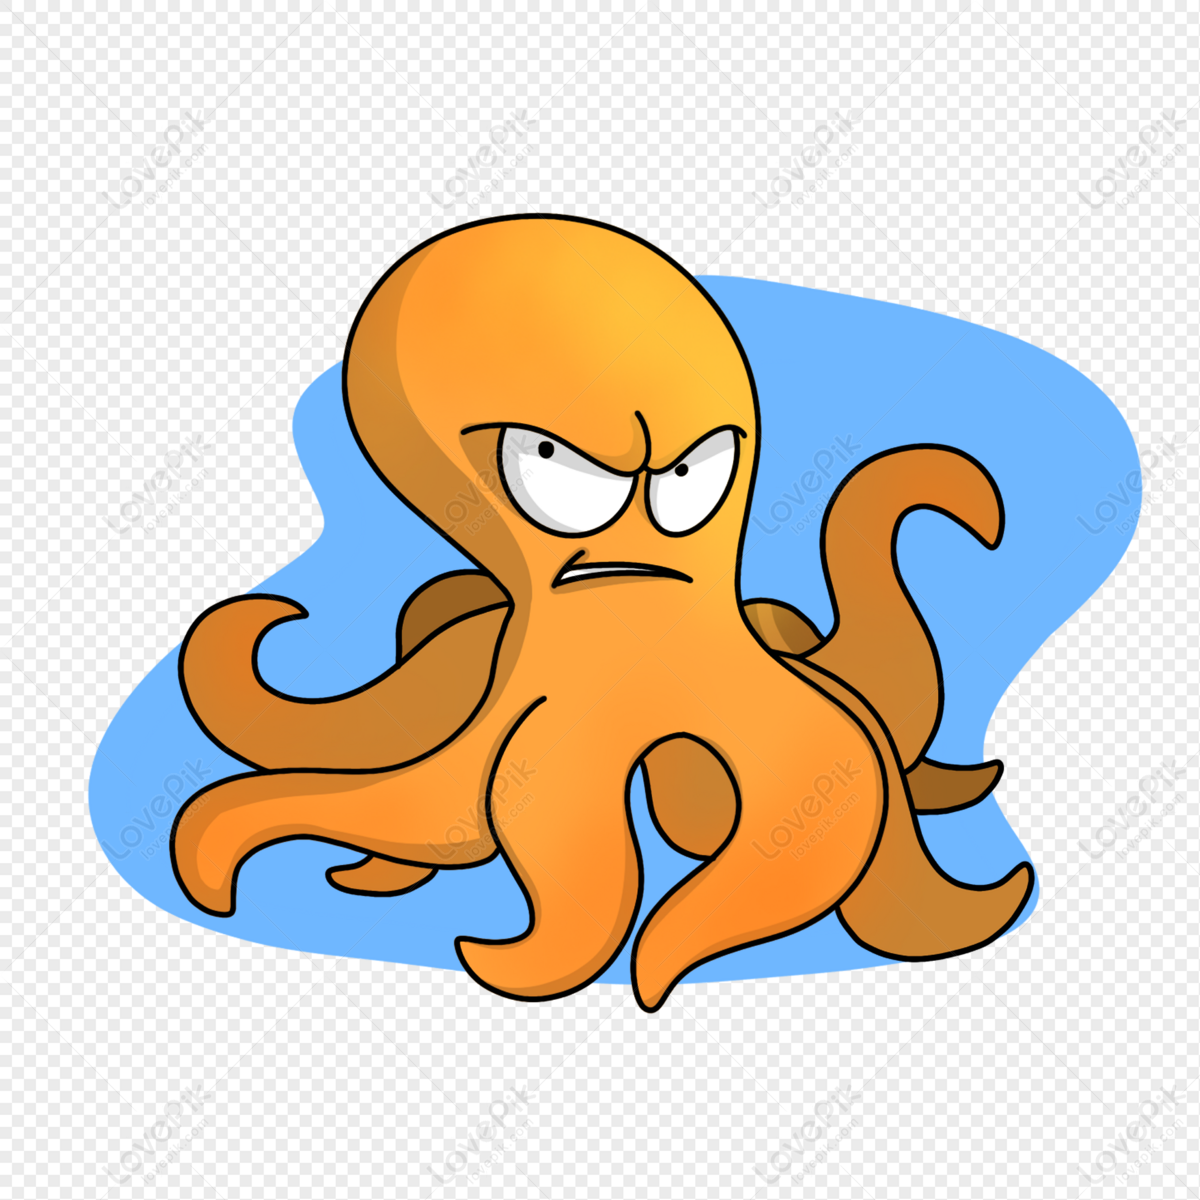 Cartoon Octopus Pictures Free PNG And Clipart Image For Free Download -  Lovepik | 401457069